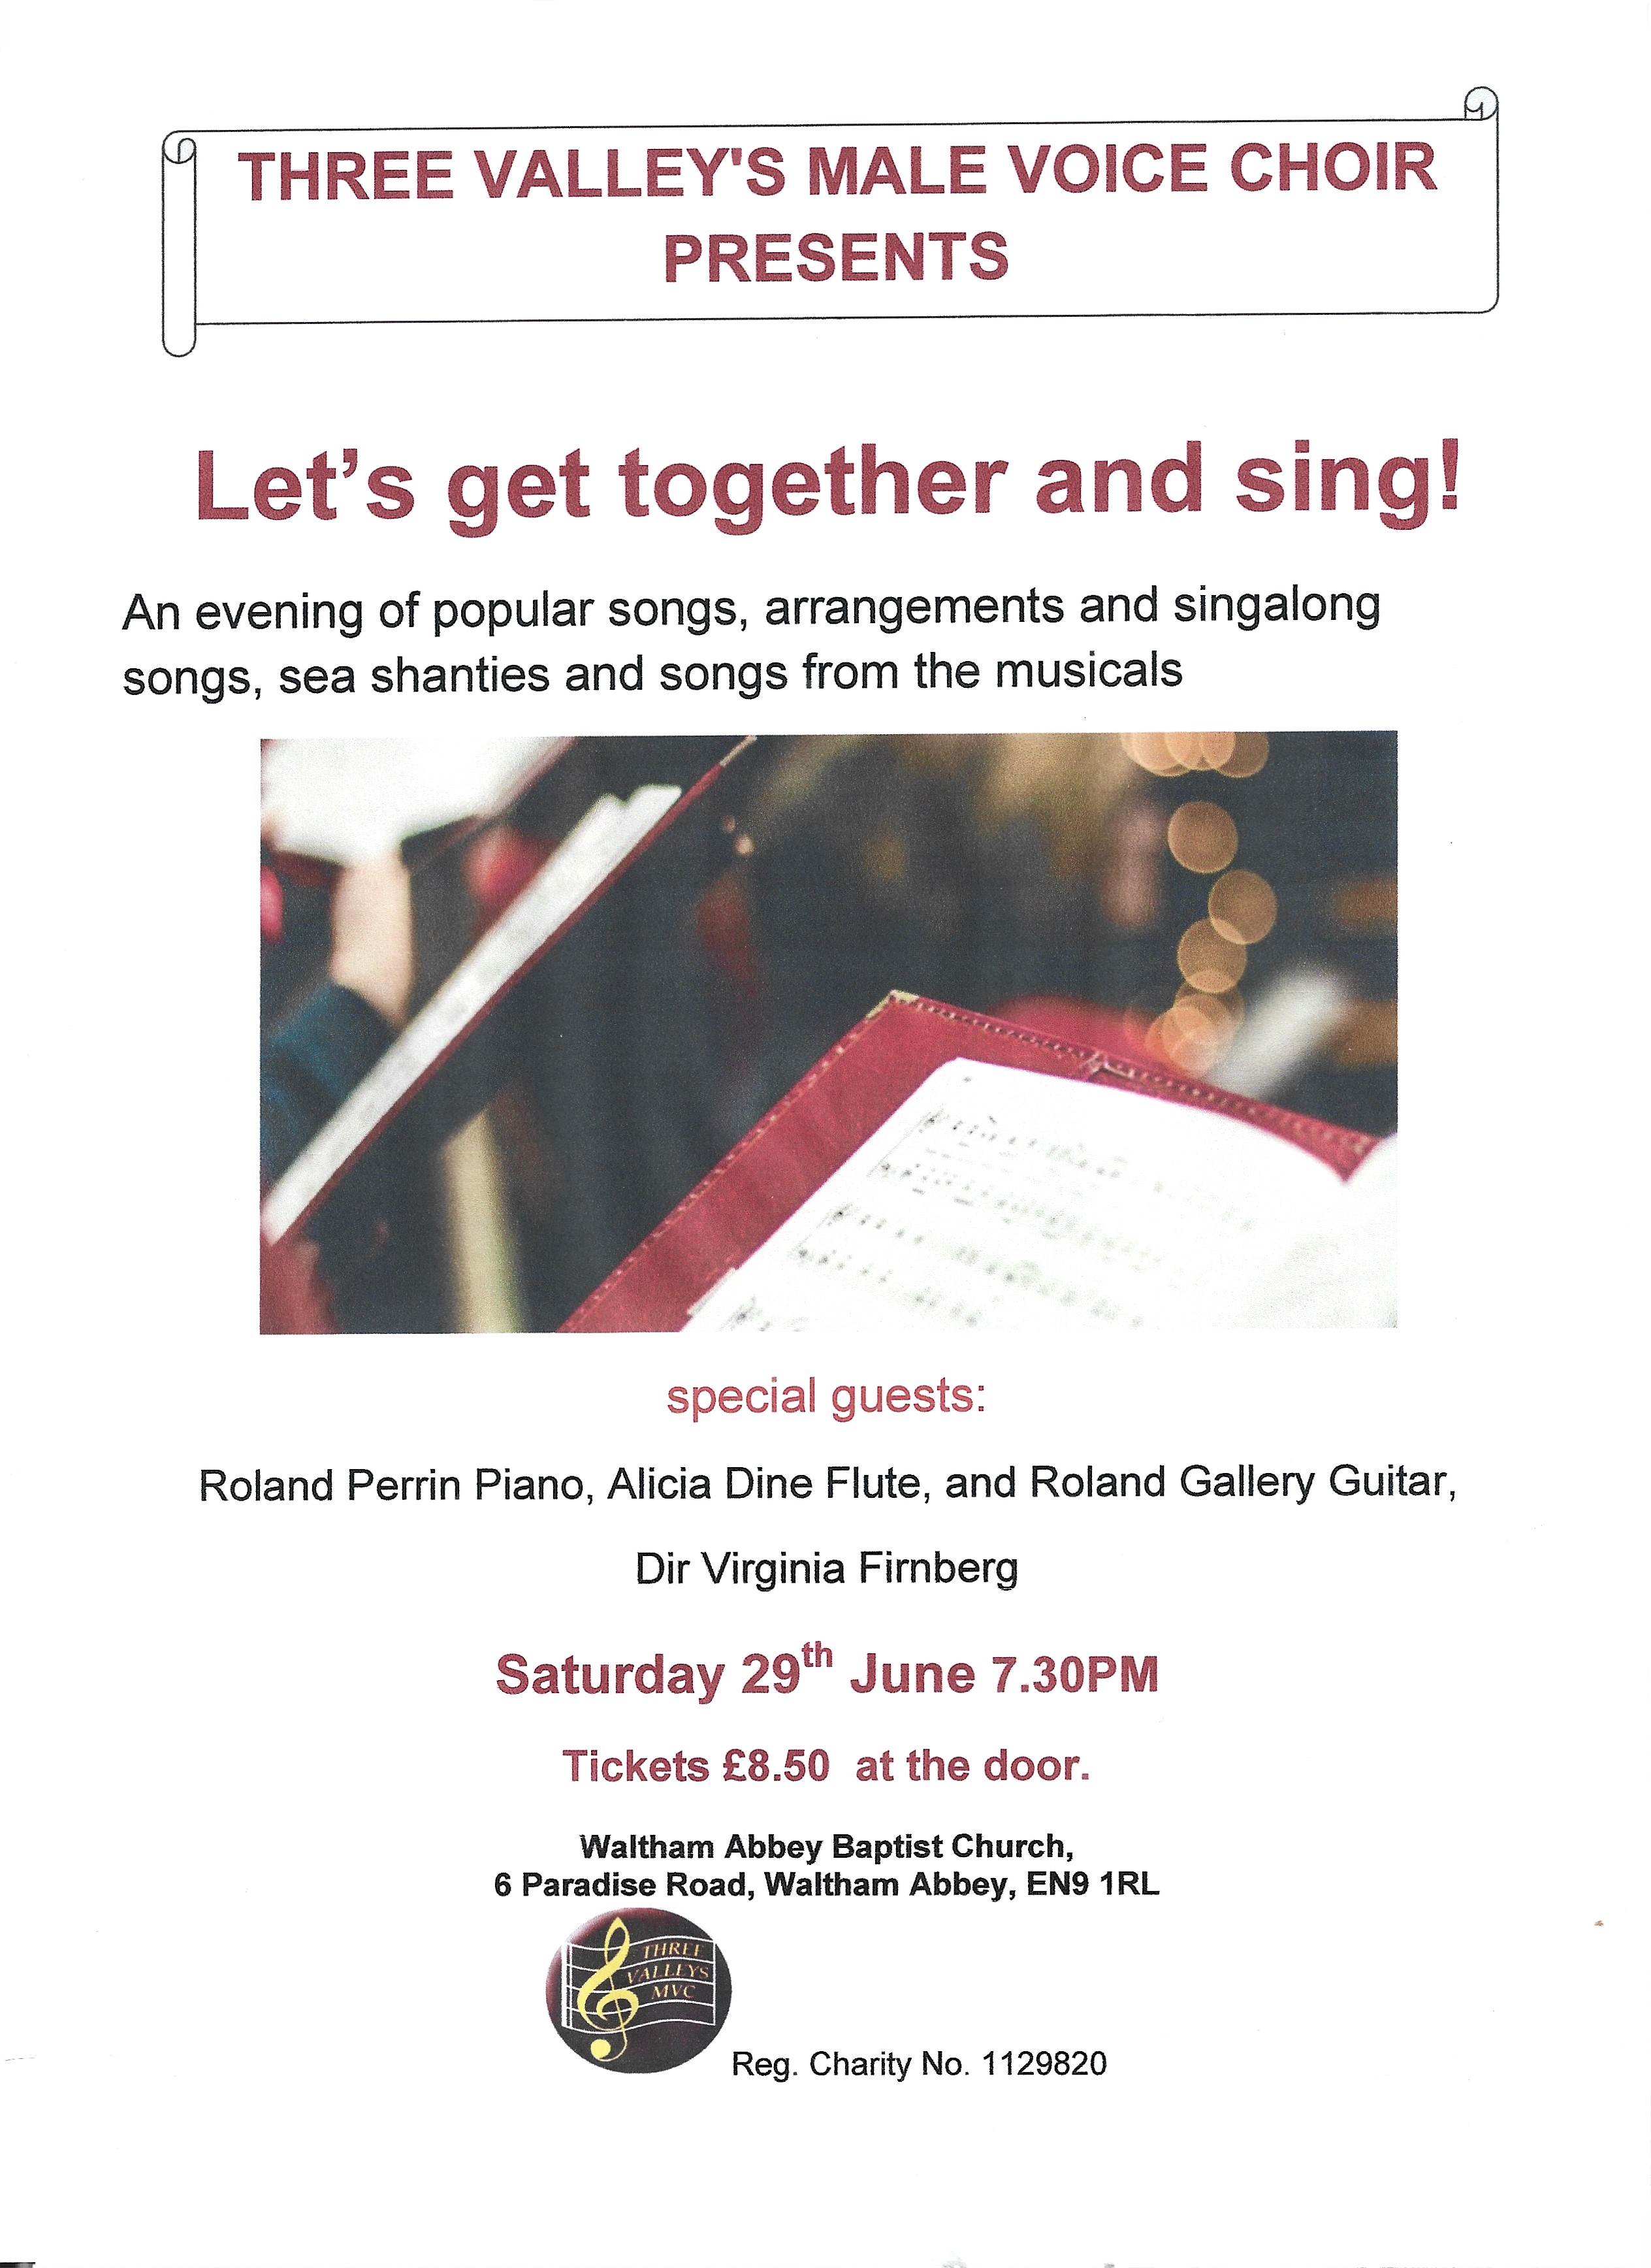 Let’s get together and sing in Waltham Abbey!